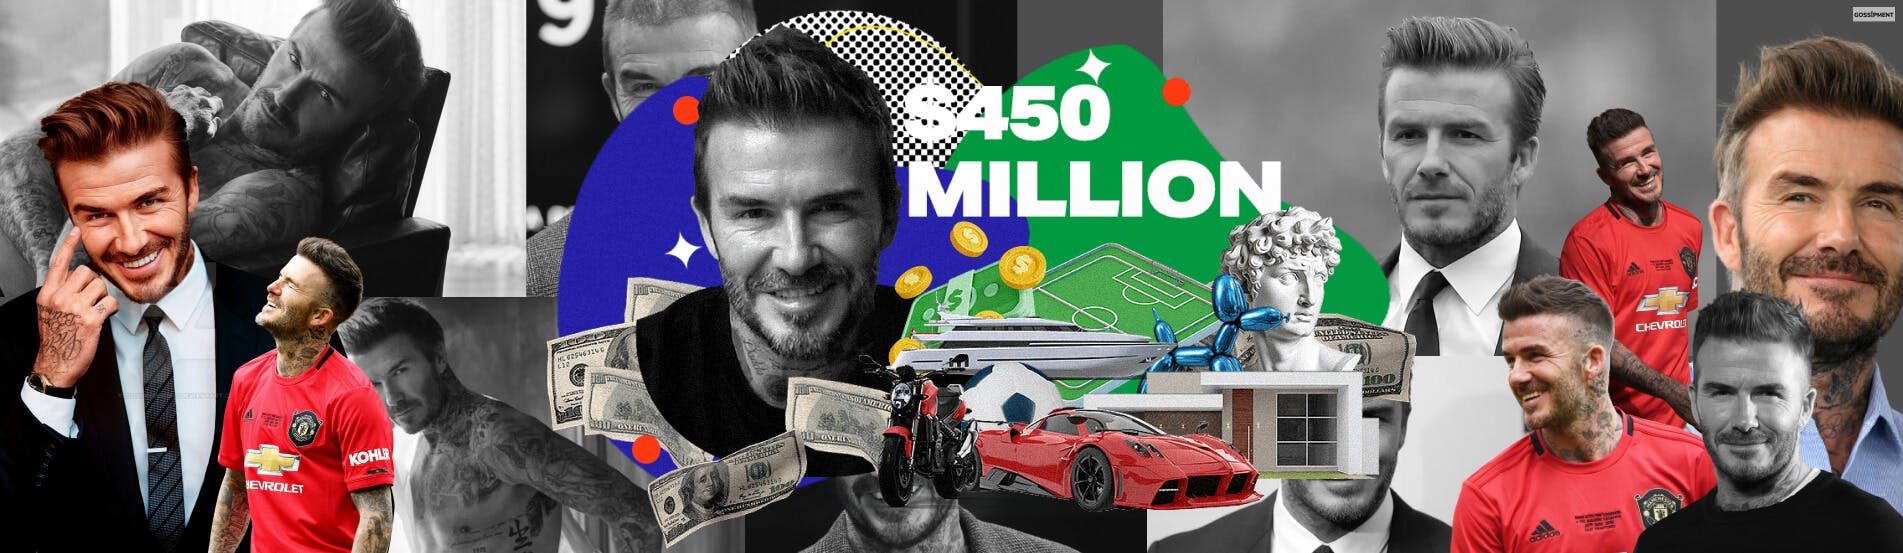 Cover Image for The David Beckham Net Worth Story: These Numbers Will Shock You!